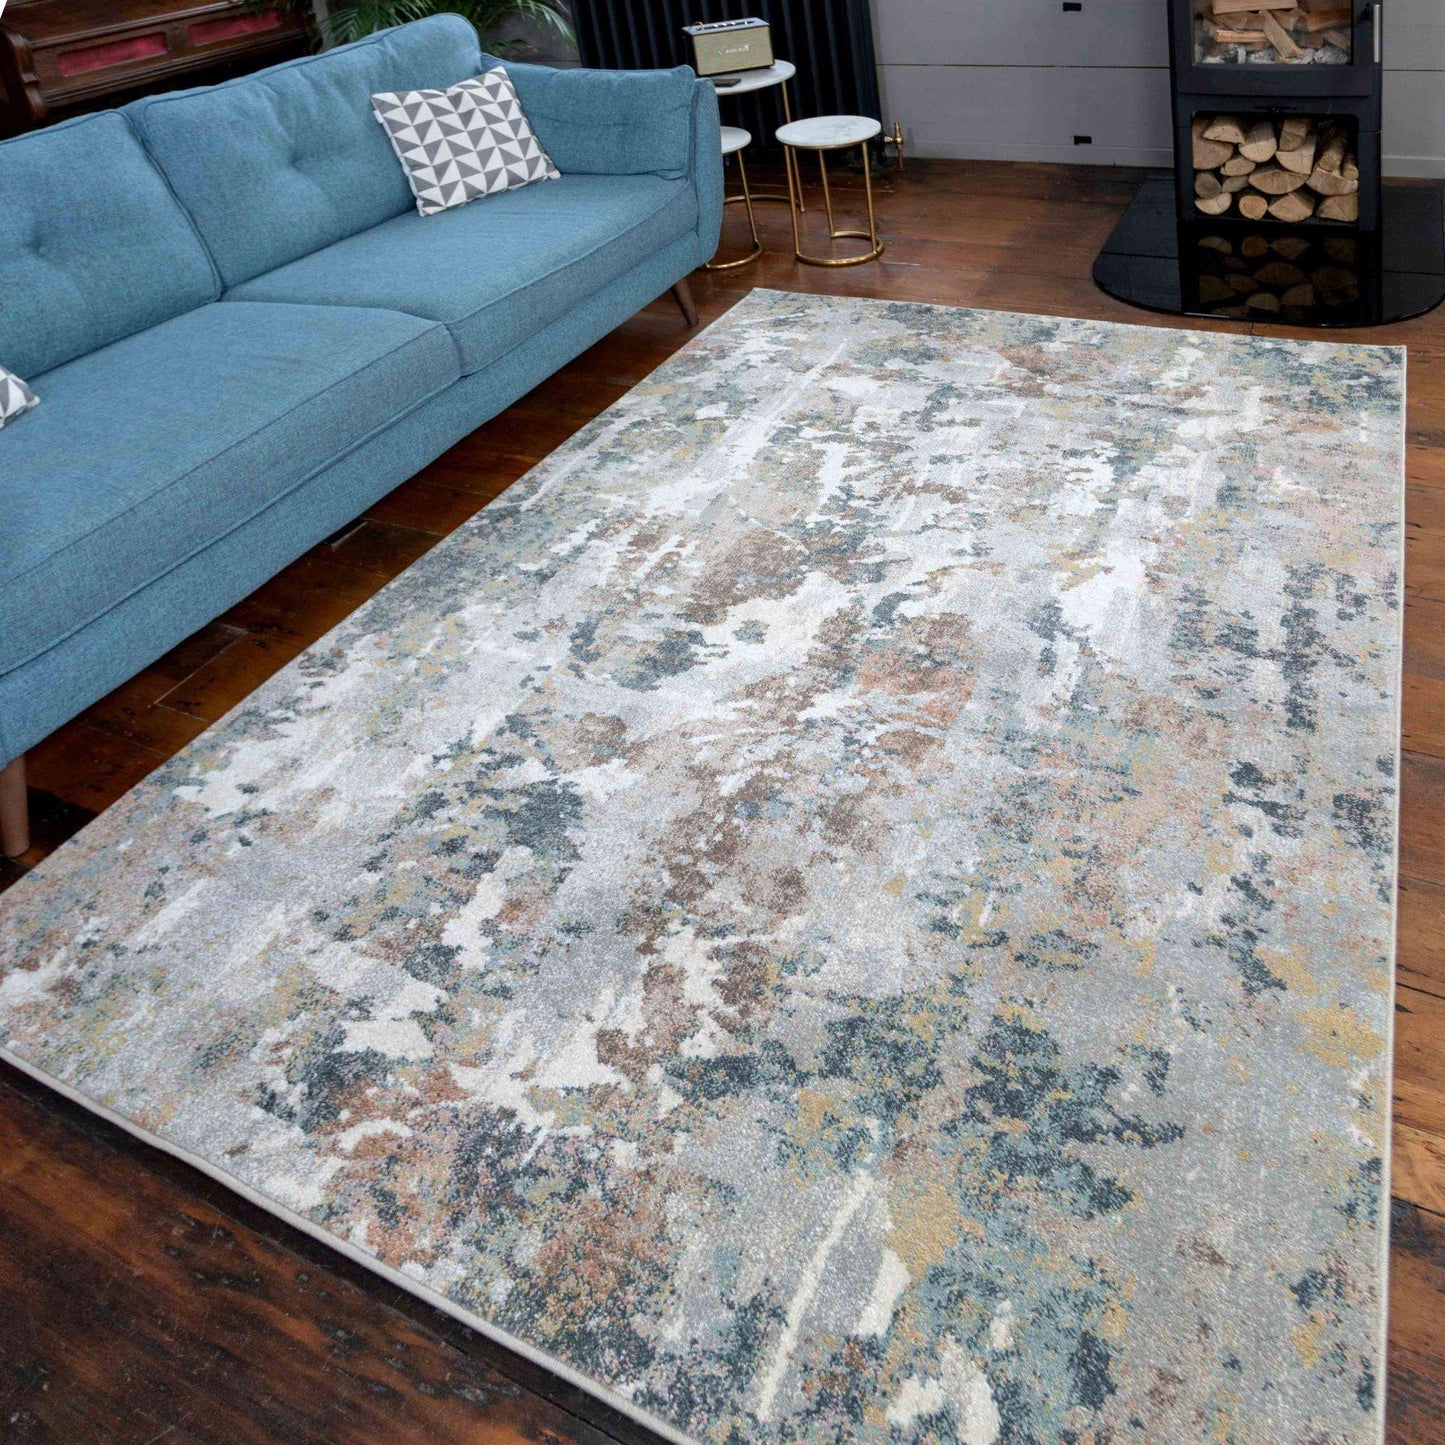 Soft Modern Blue Grey Painted Canvas Effect Rugs